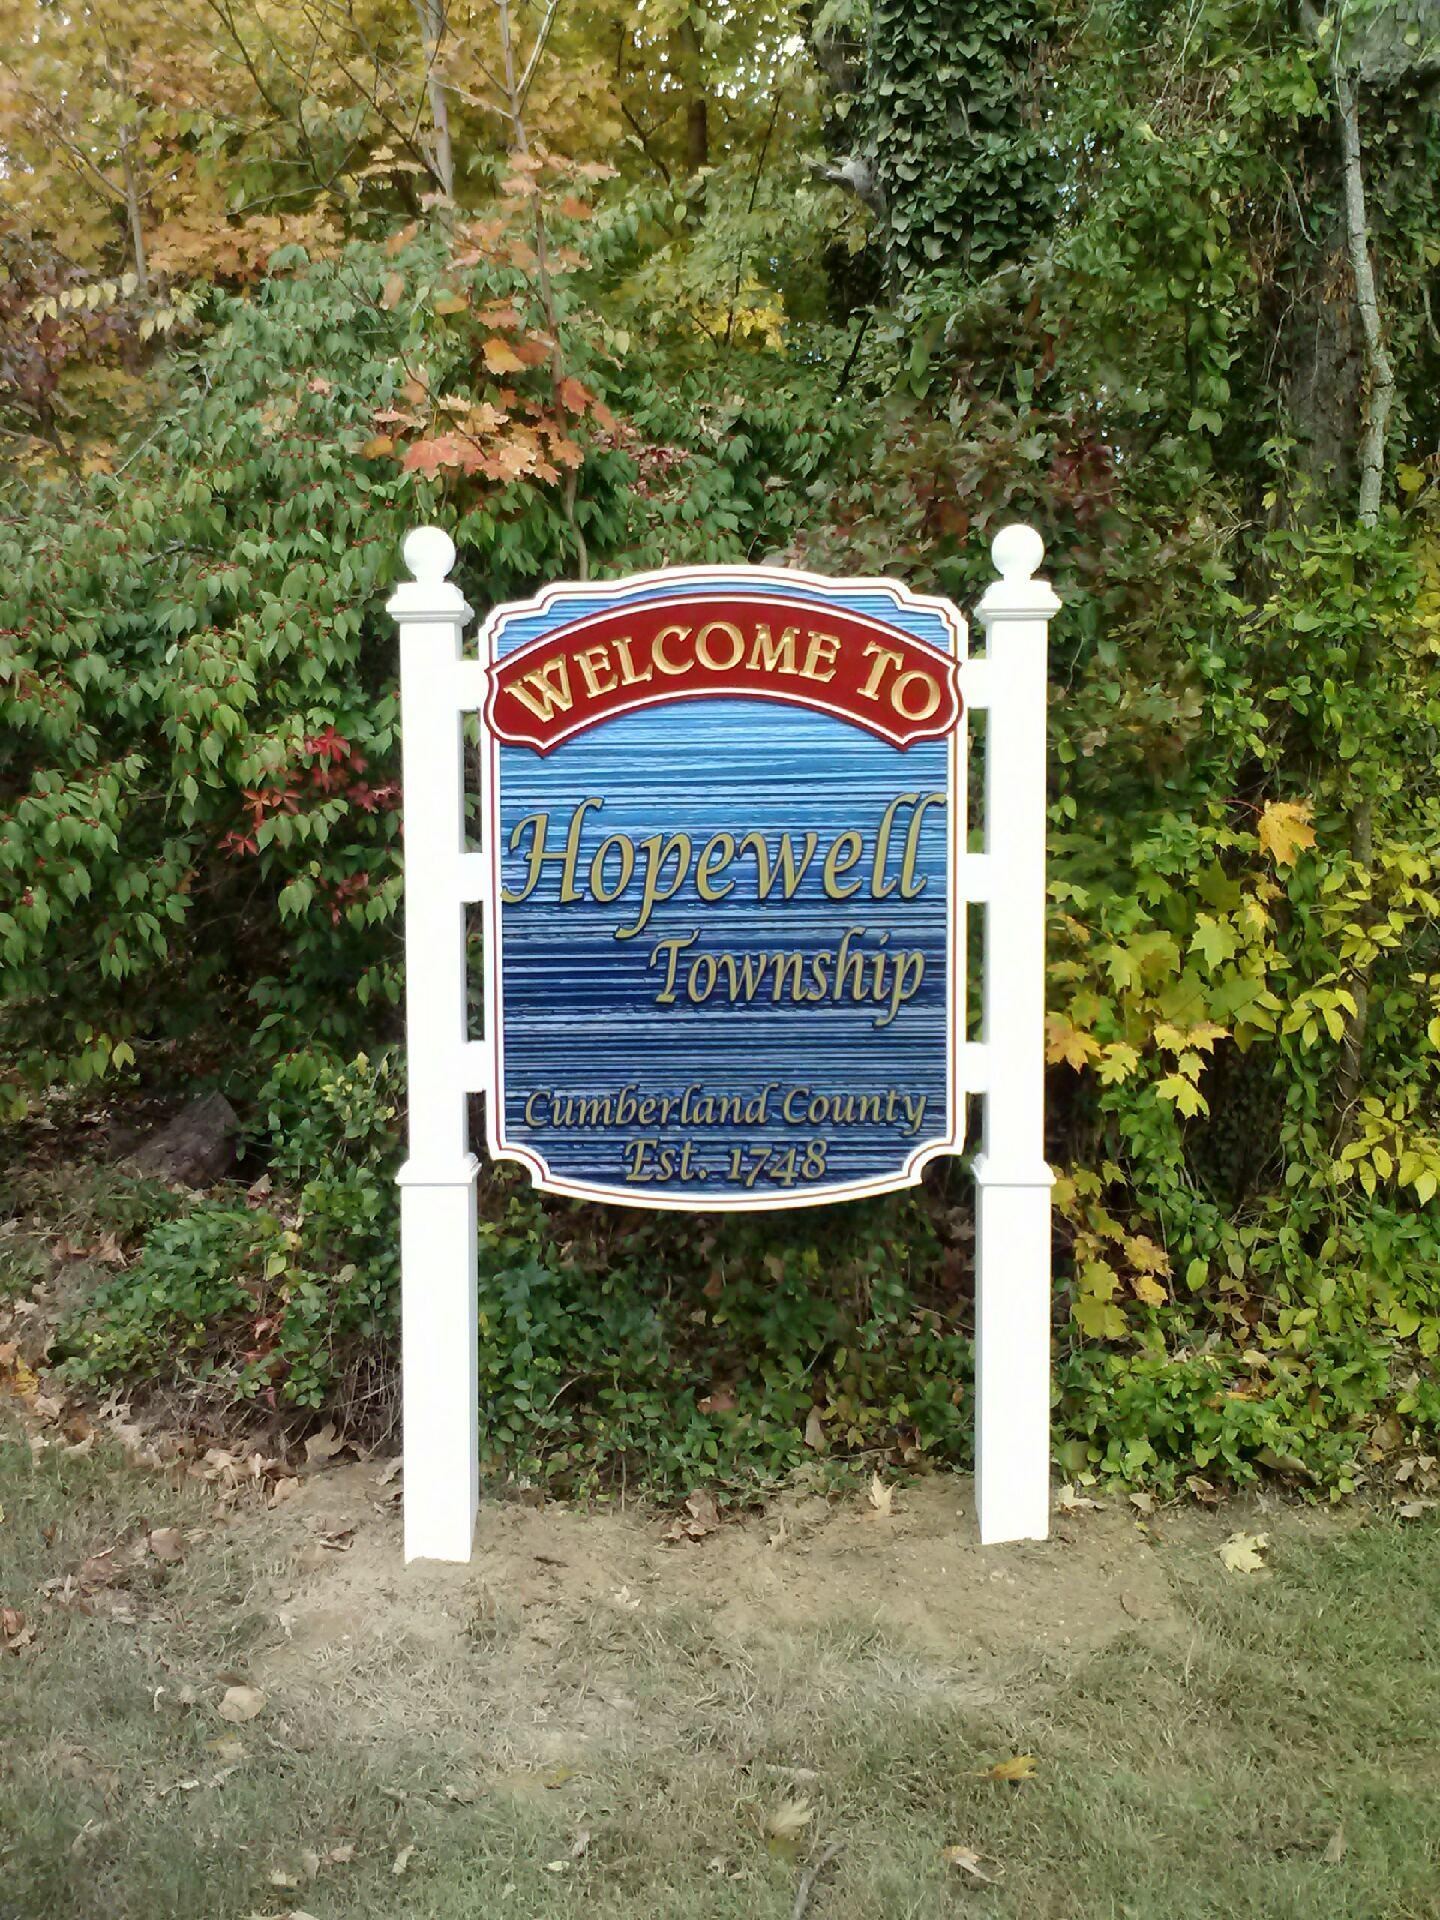 Hopewell township